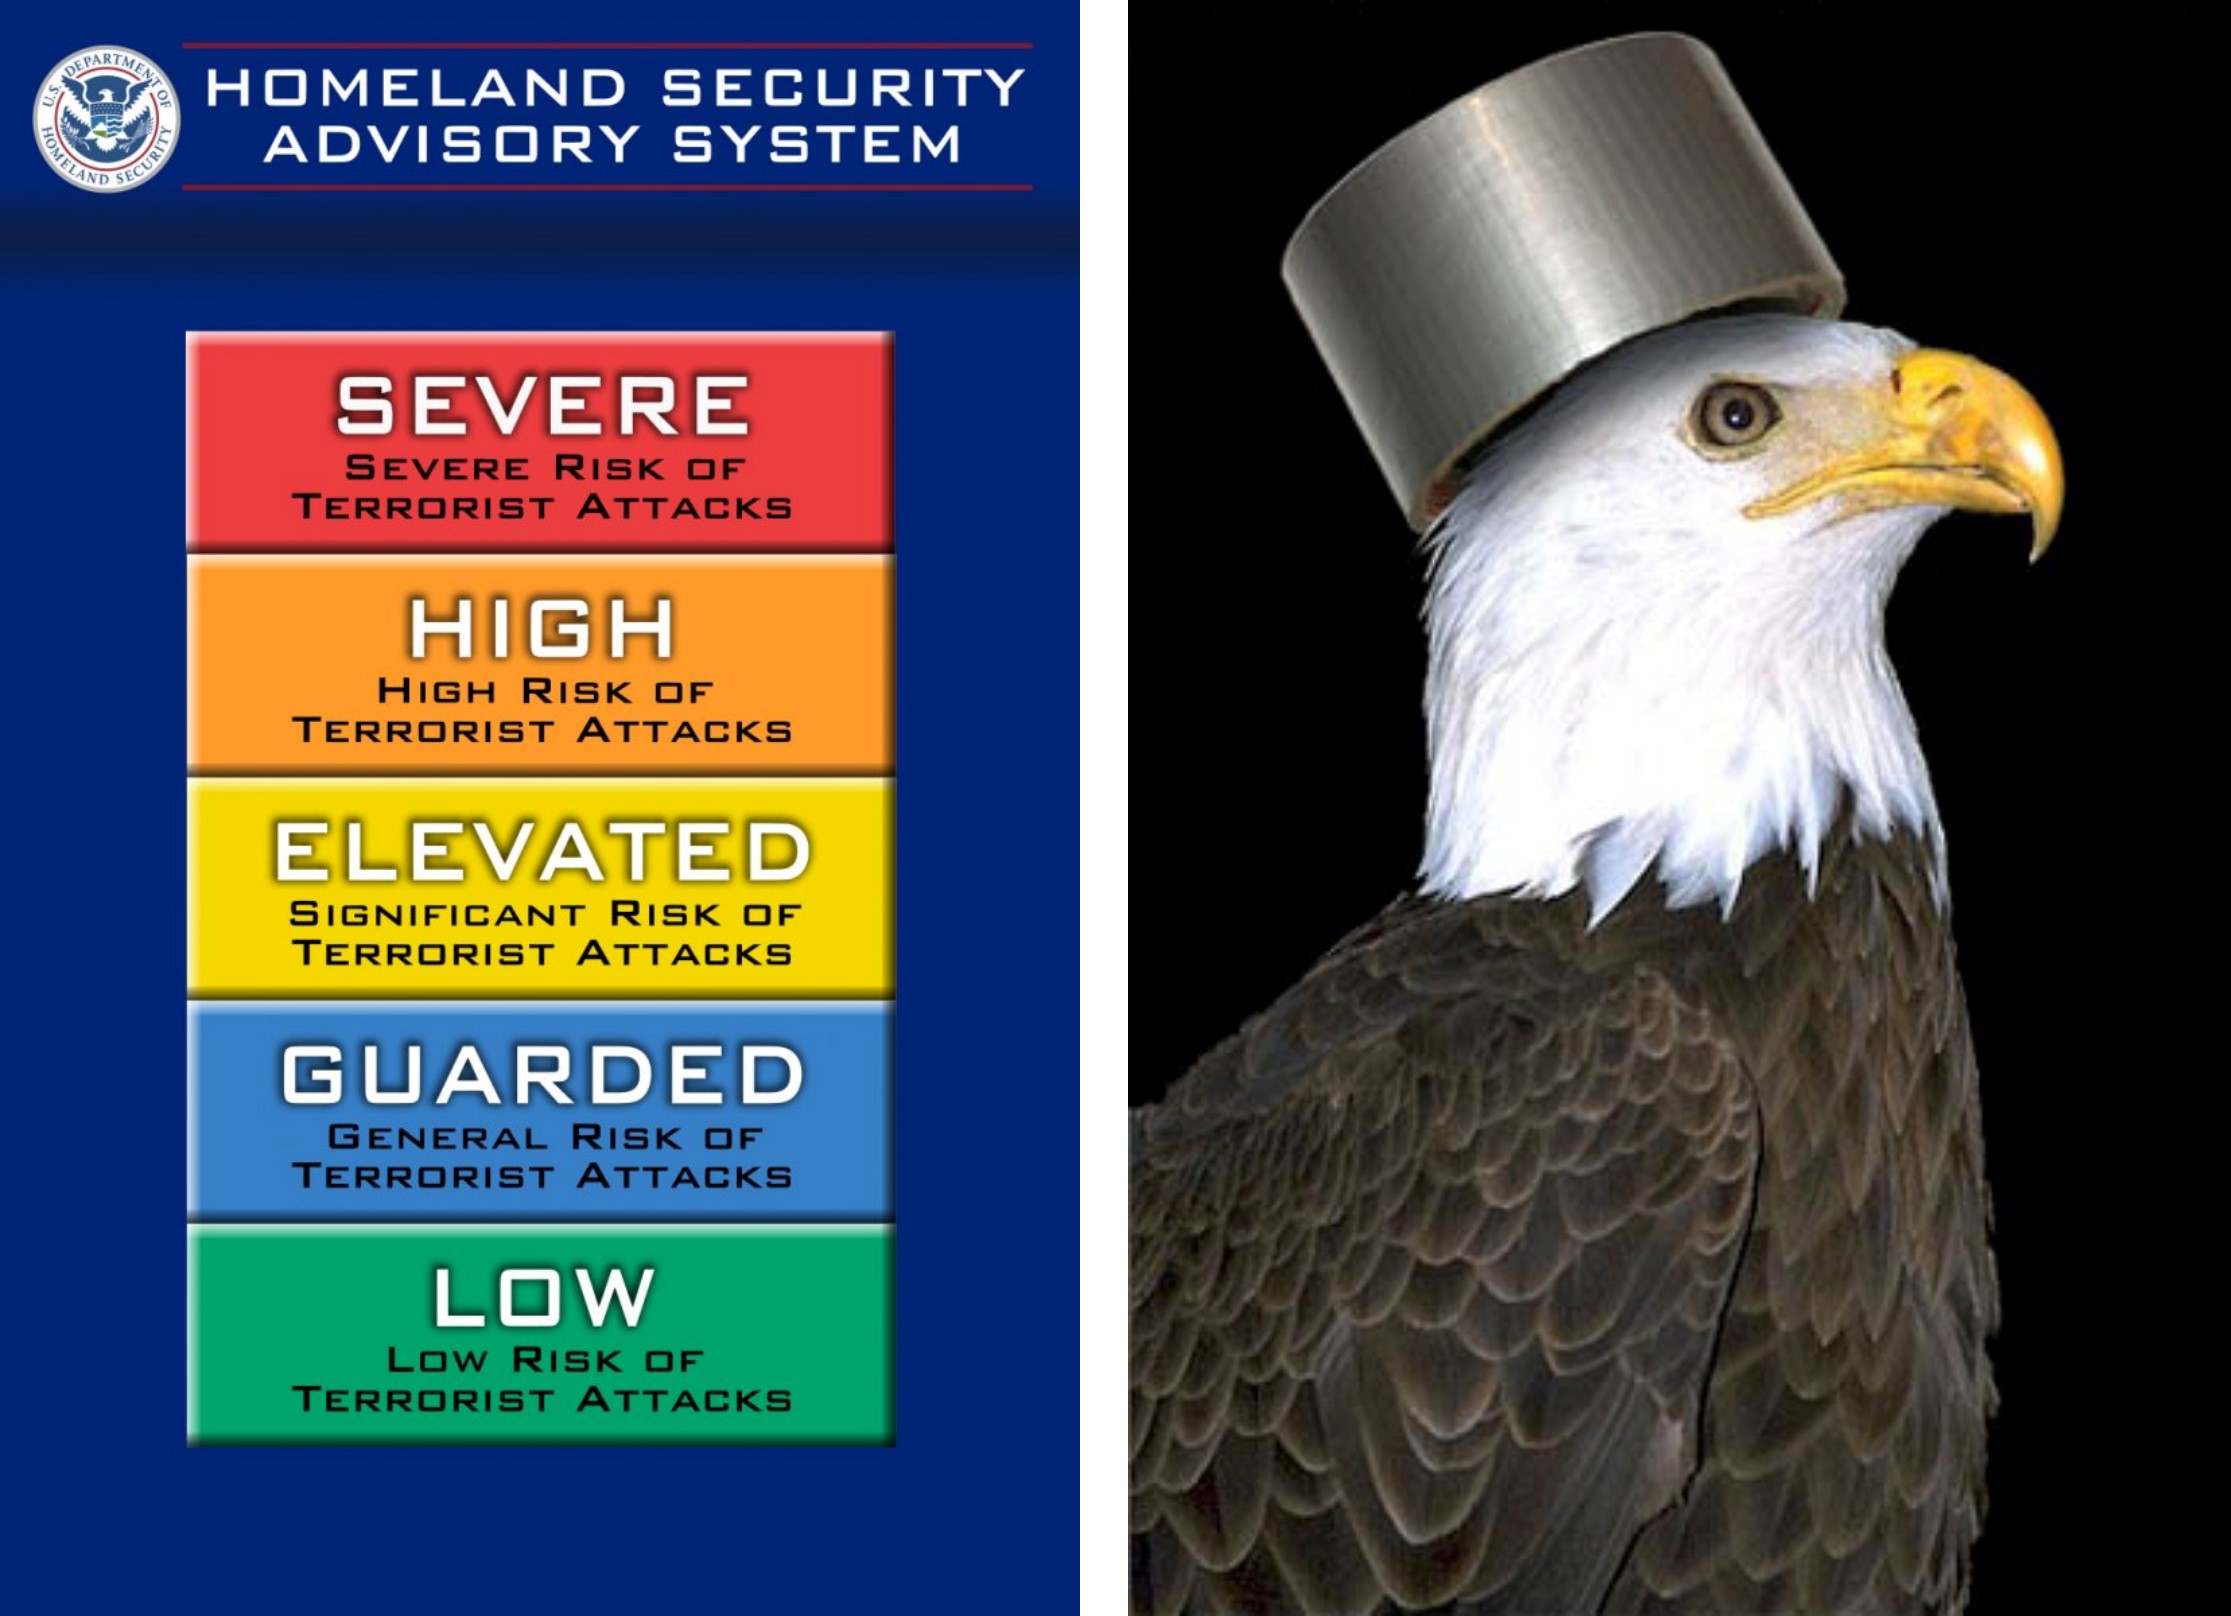 On the left, the Homeland Security Advisory System. On the right, satirical image 'Duct Tape and Cover.'